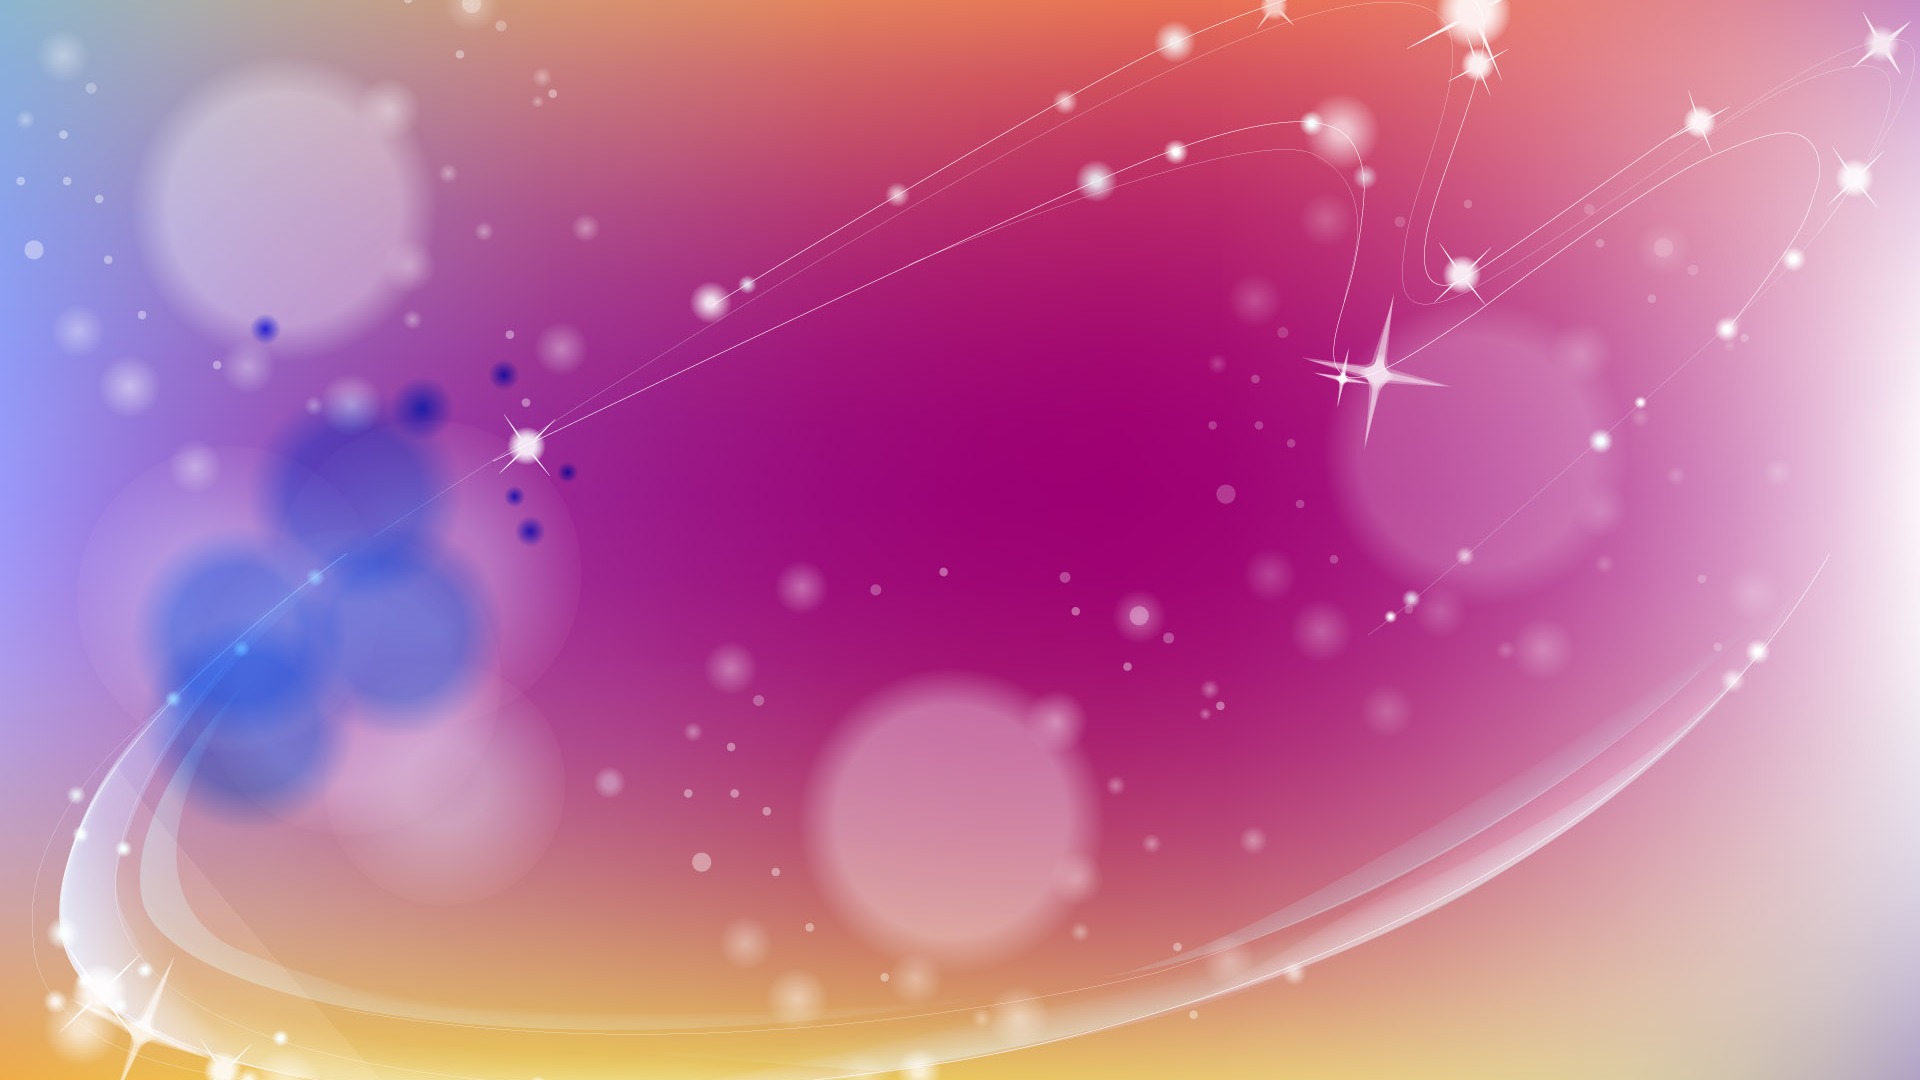 Colorful vector background wallpaper (4) #20 - 1920x1080